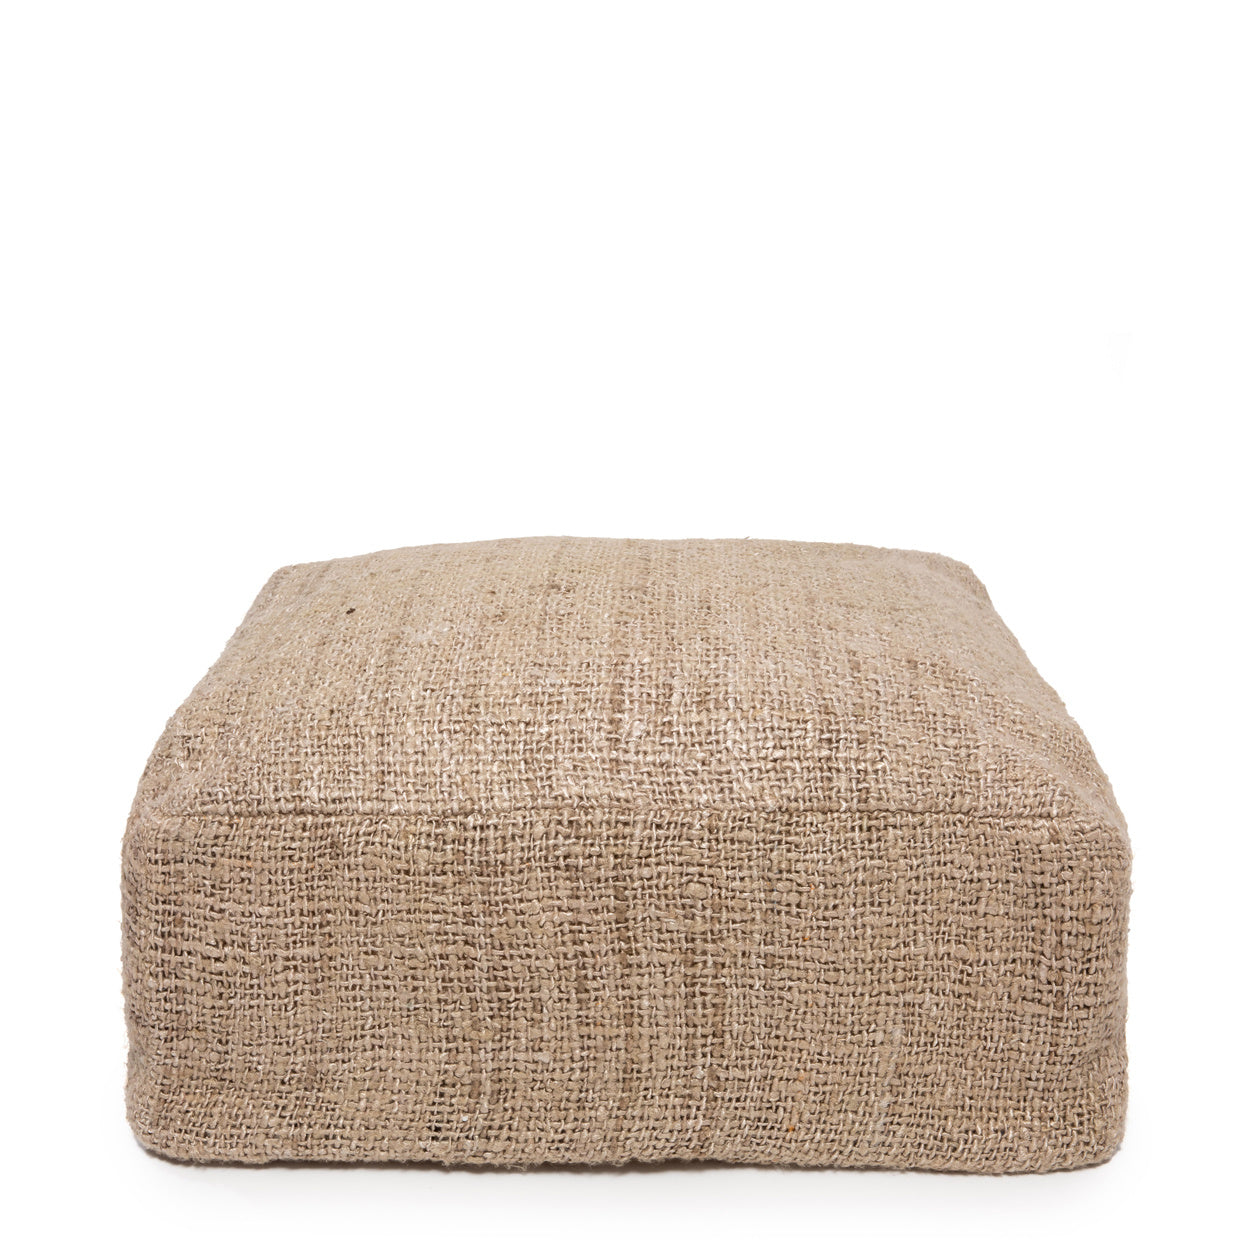 THE OH MY GEE Pouffe beige